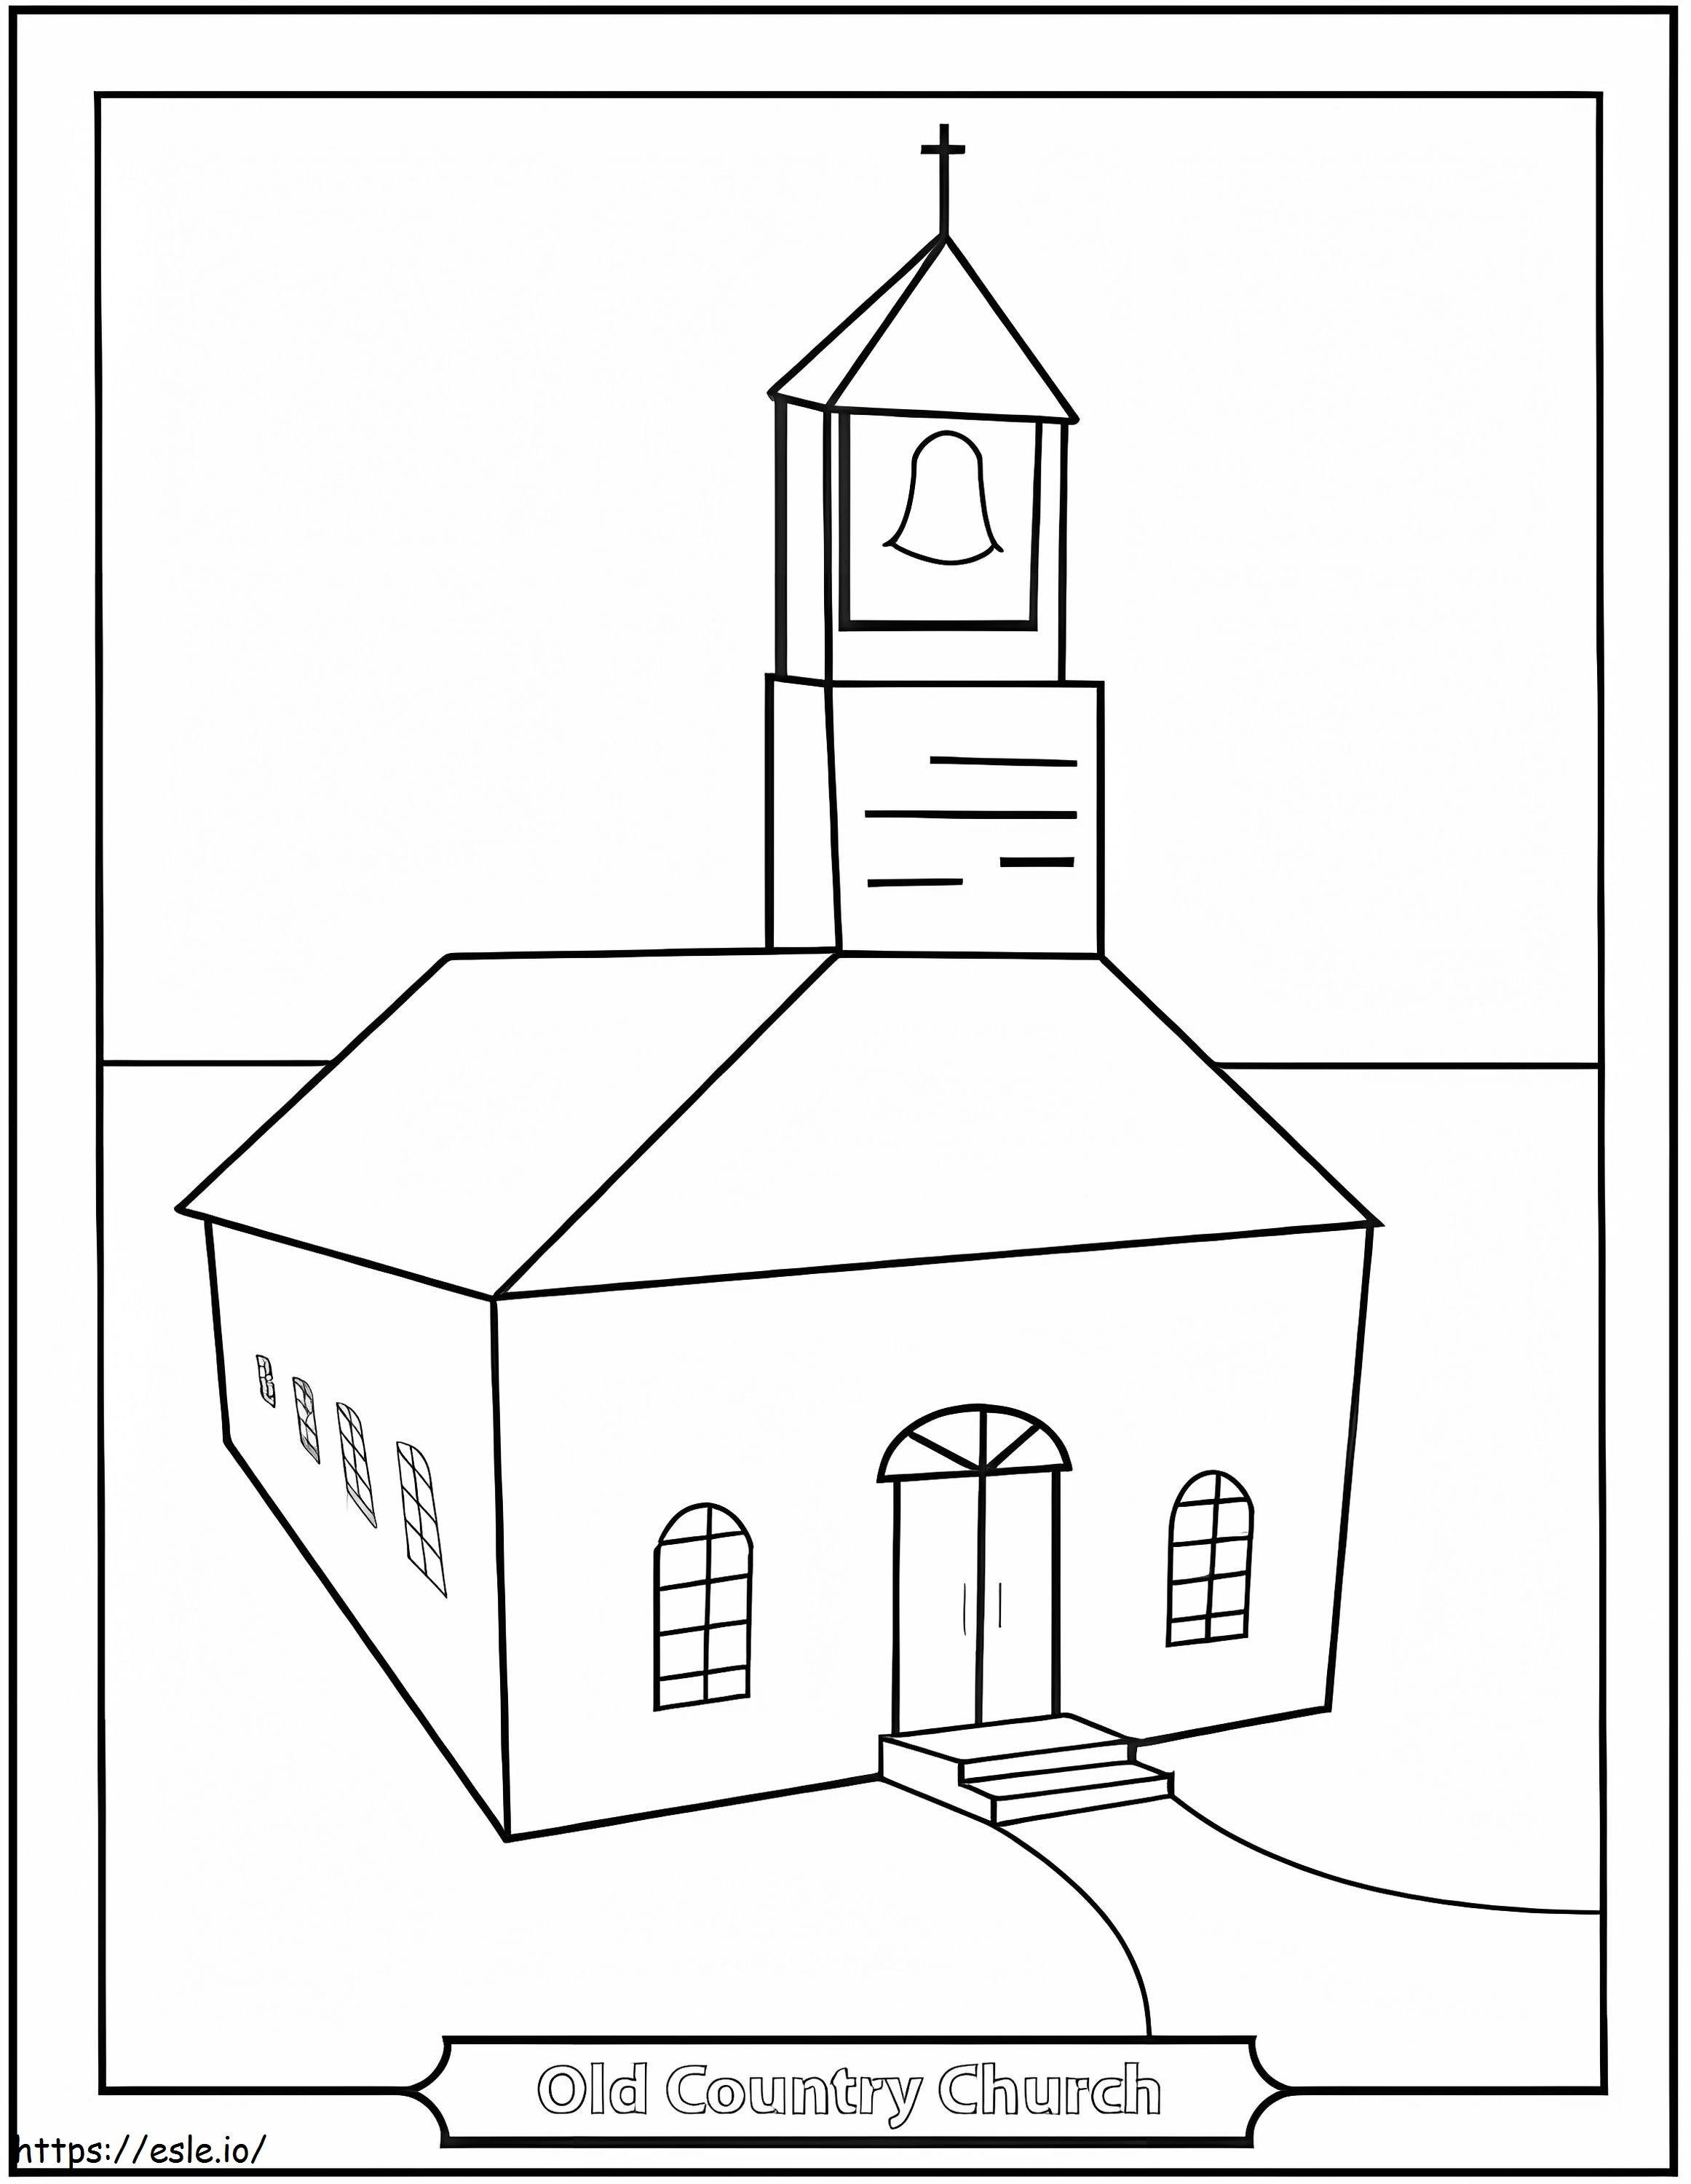 Old Country Church coloring page